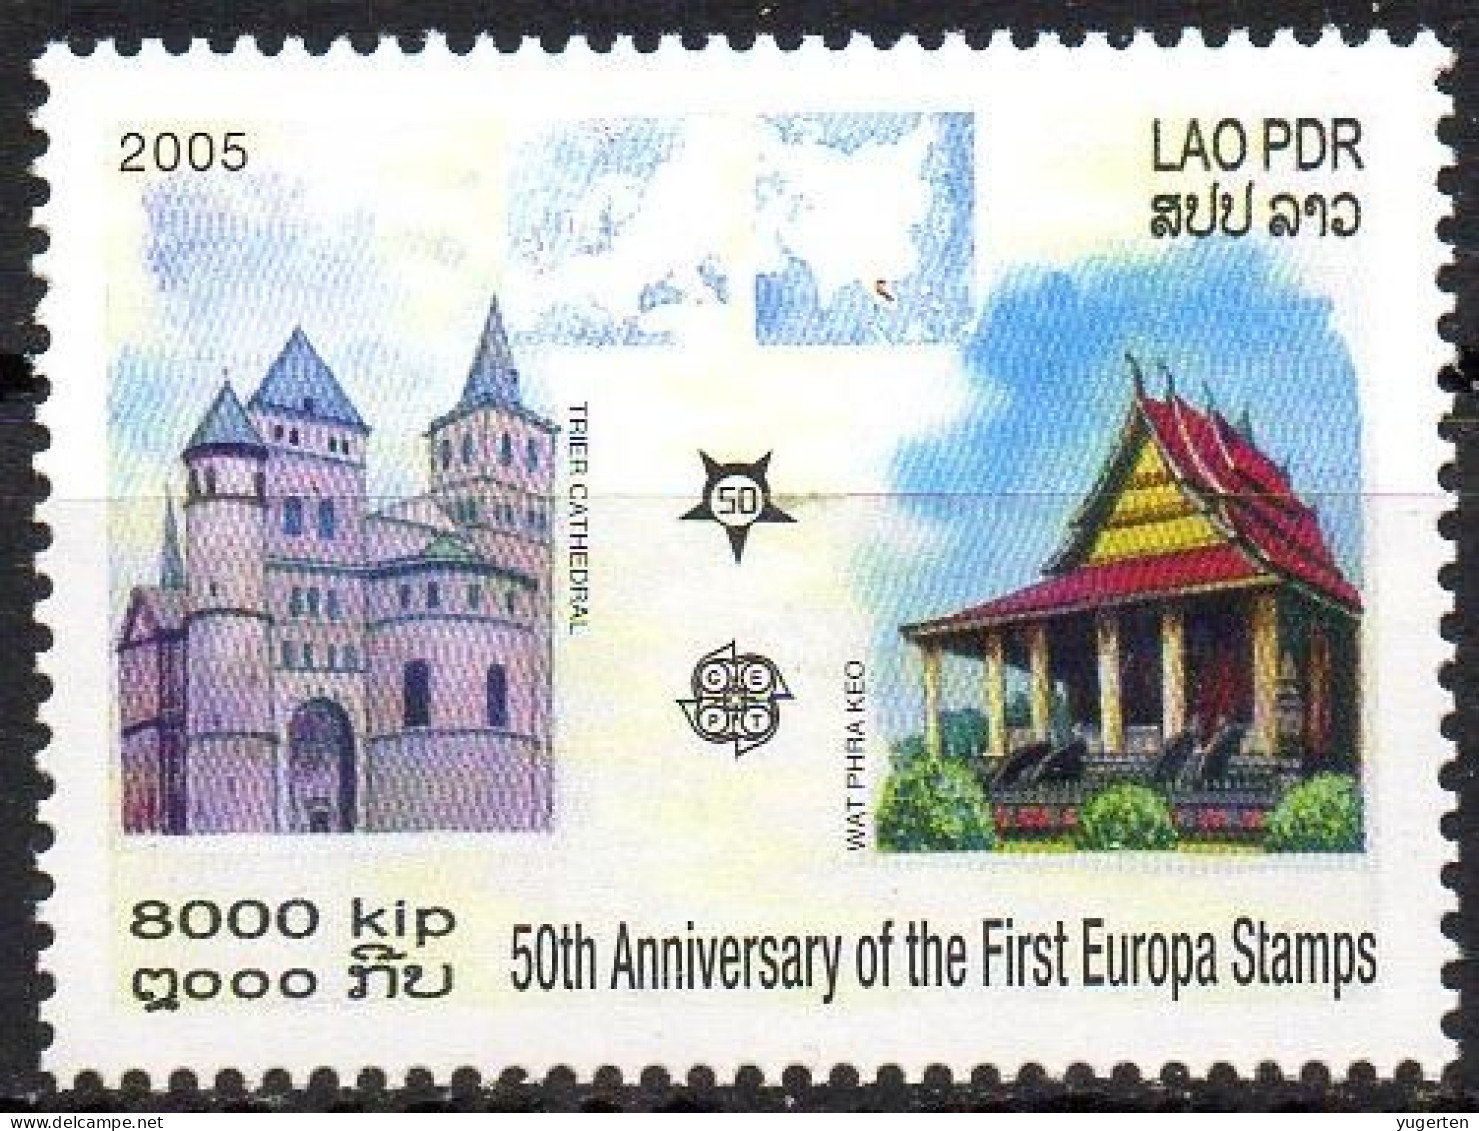 LAOS 2005 - 1v - MNH - The 50 Years Anniv. Of The First EUROPA Stamps - Chateau - Architecture Castle Castillo Schloss - Gezamelijke Uitgaven